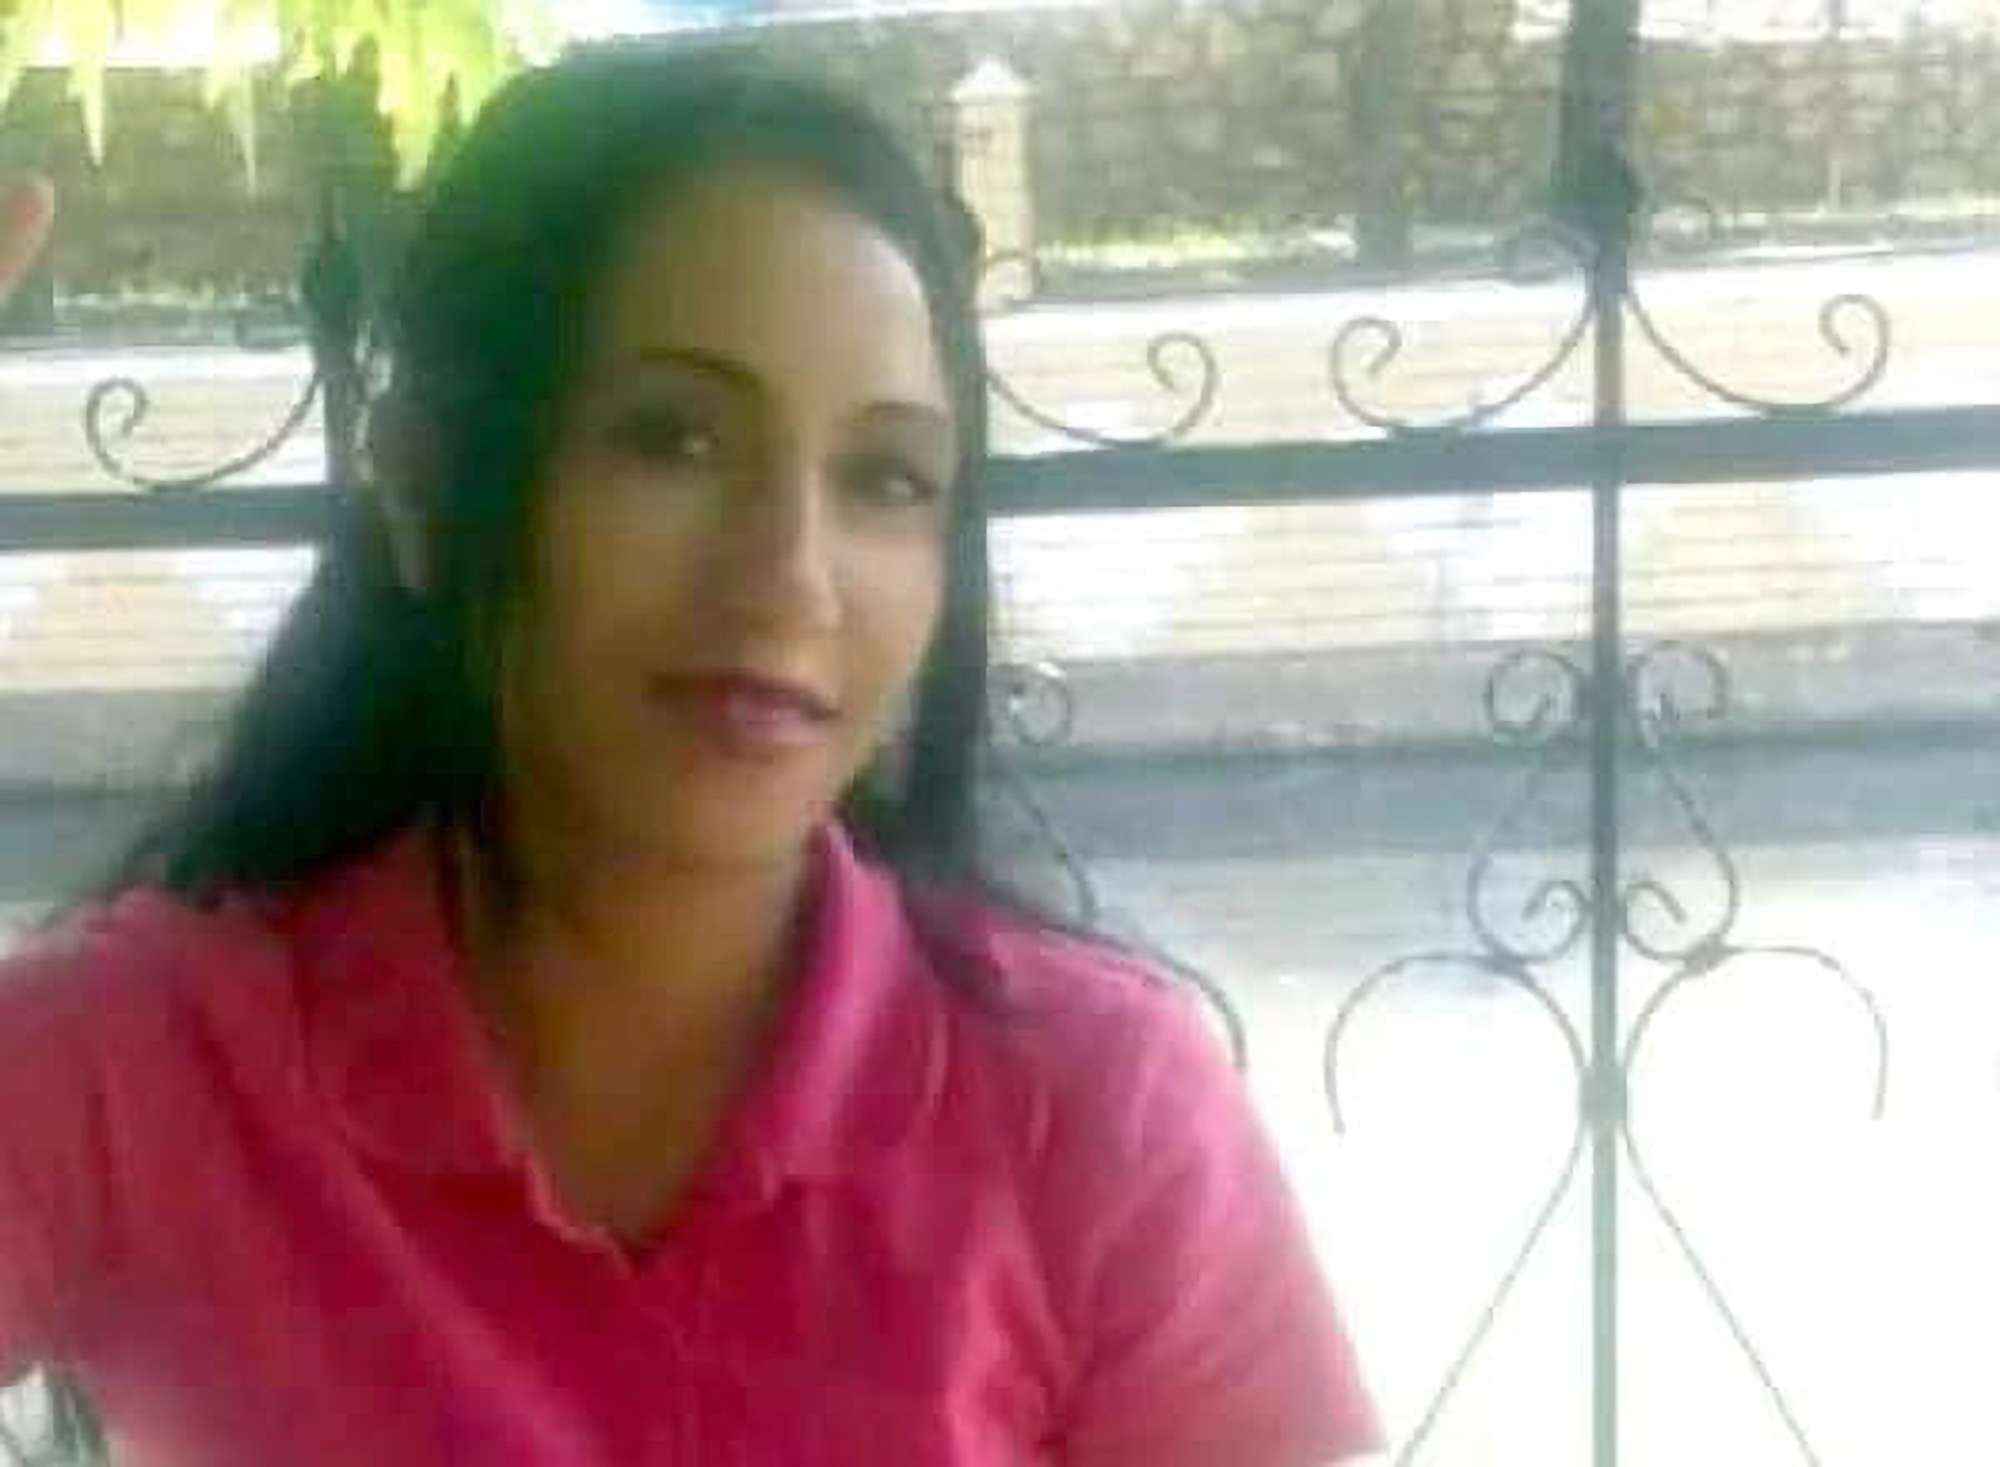 Mum Of Three Is Stabbed To Death By Her Ex-Husband And Her New Husband In Bizarre Attack